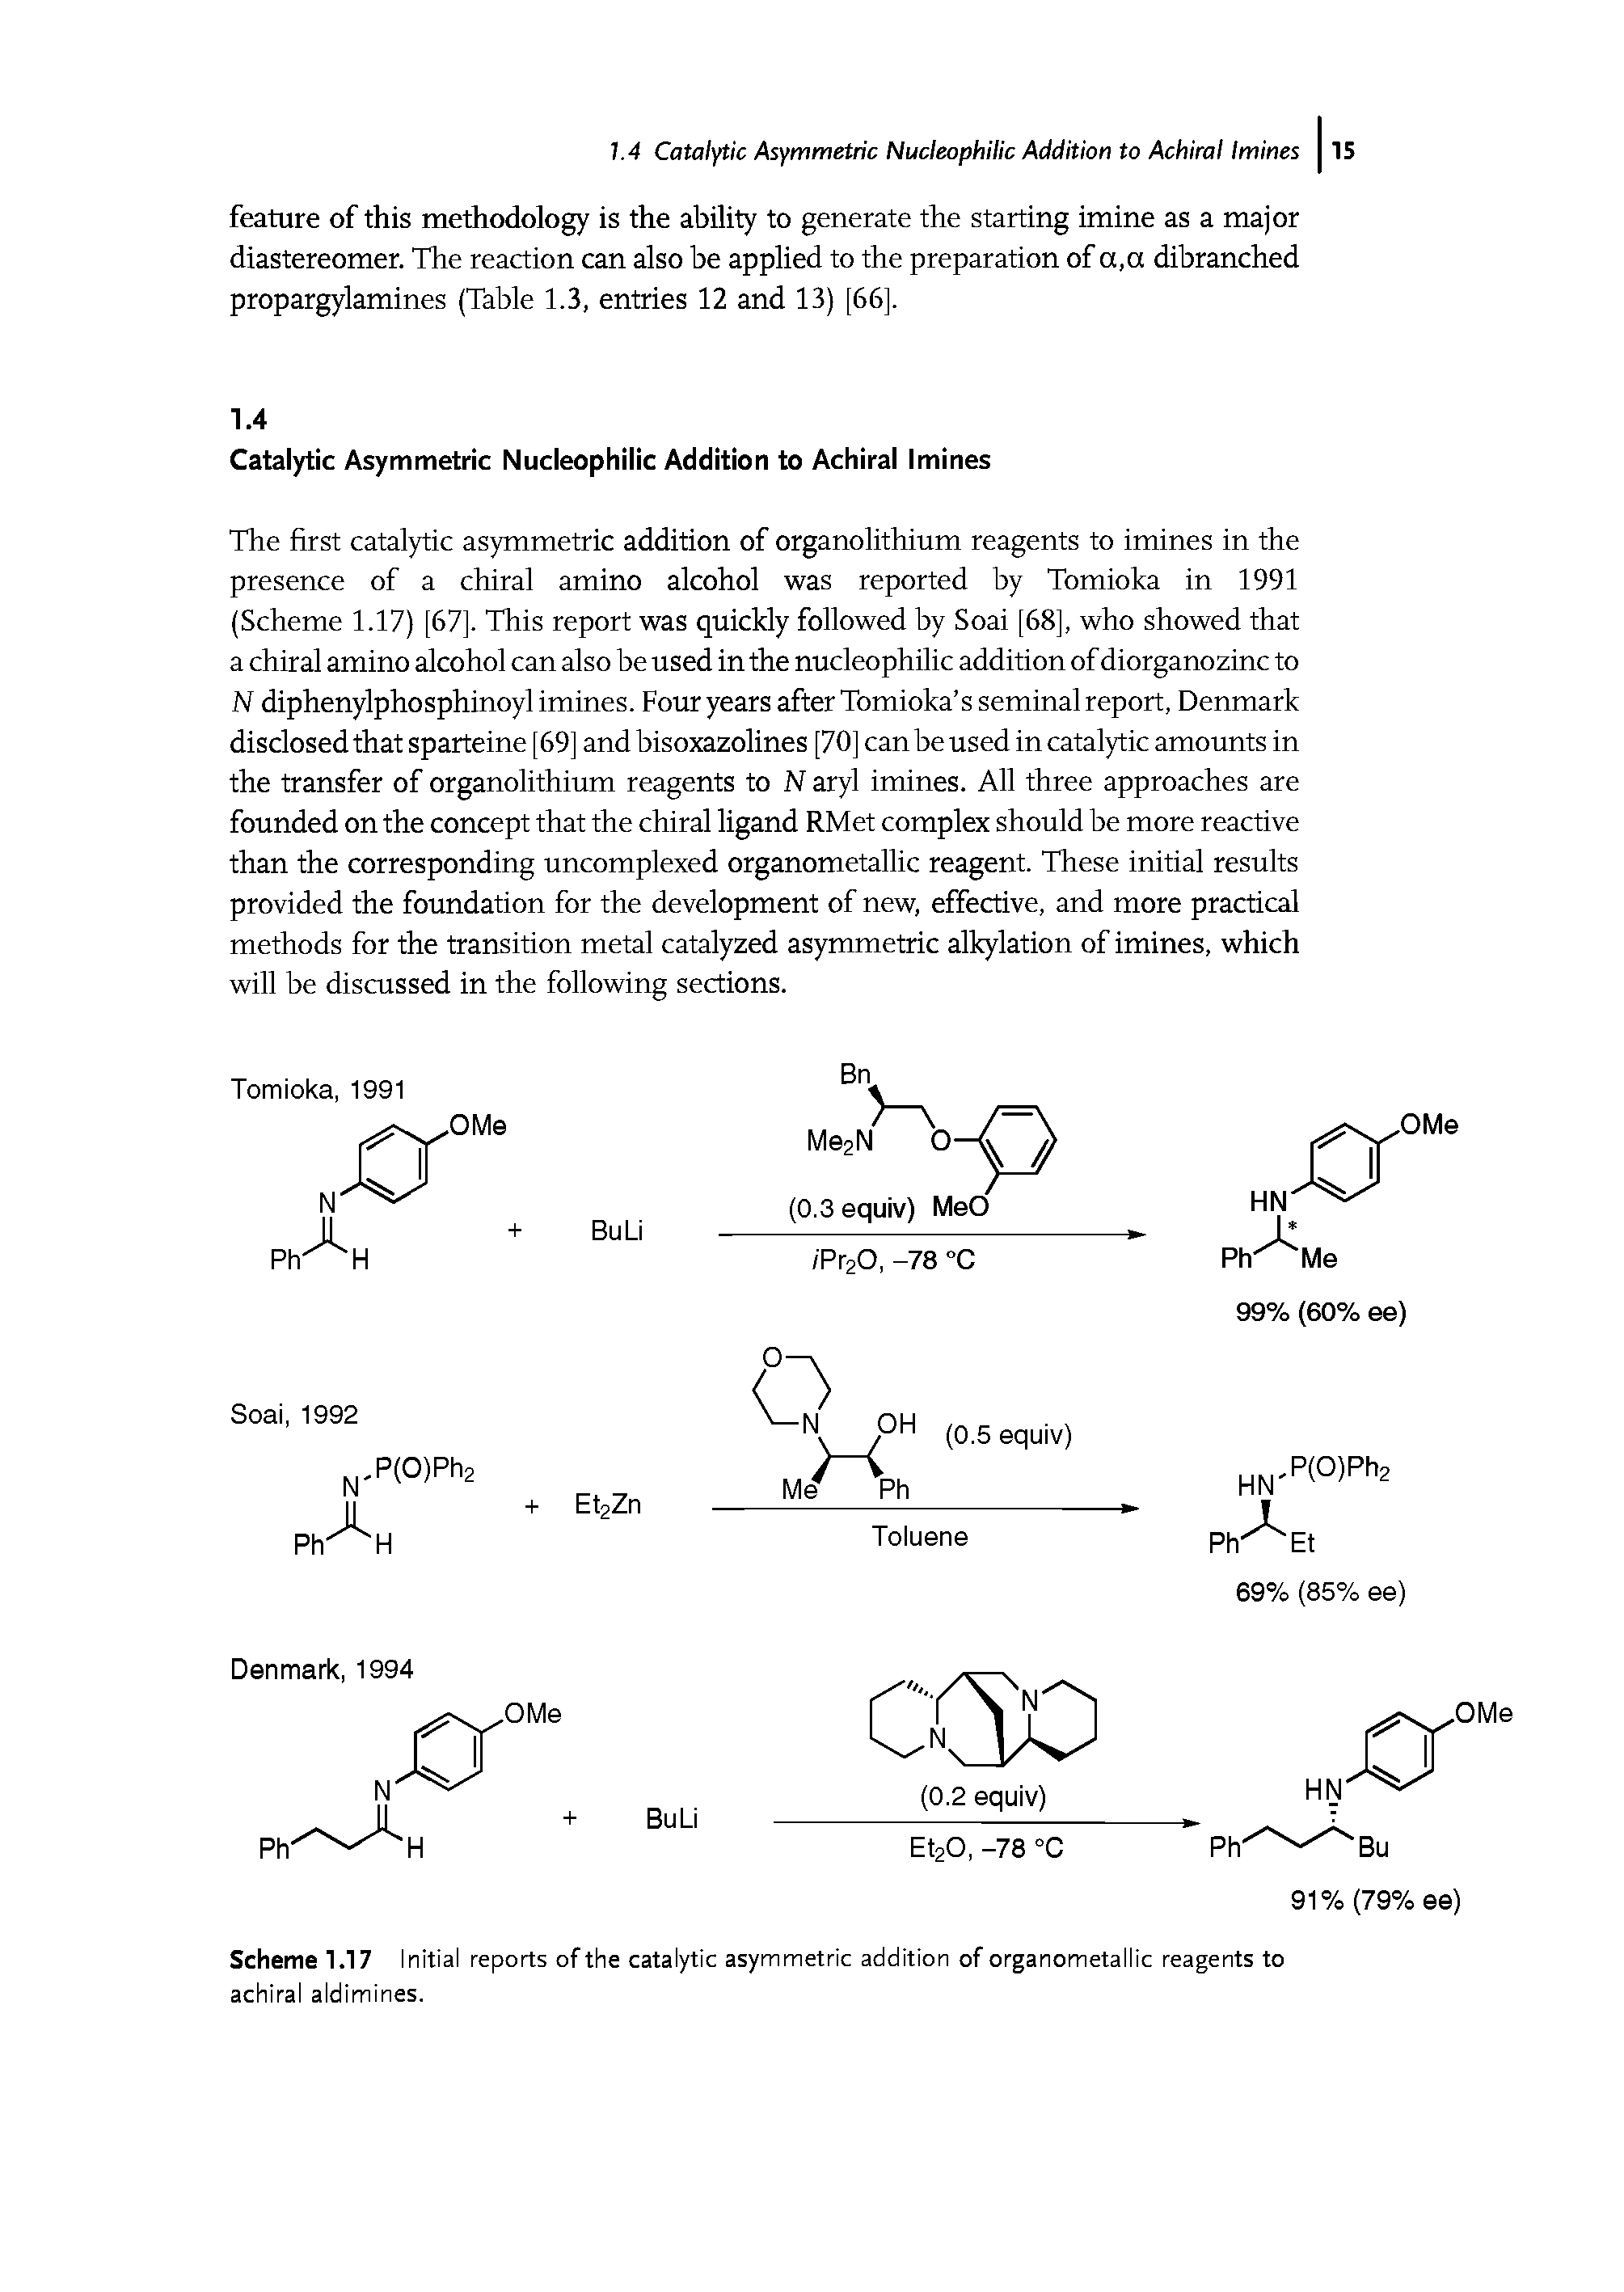 Scheme 1.17 Initial reports of the catalytic asymmetric addition of organometallic reagents to achiral aldimines.